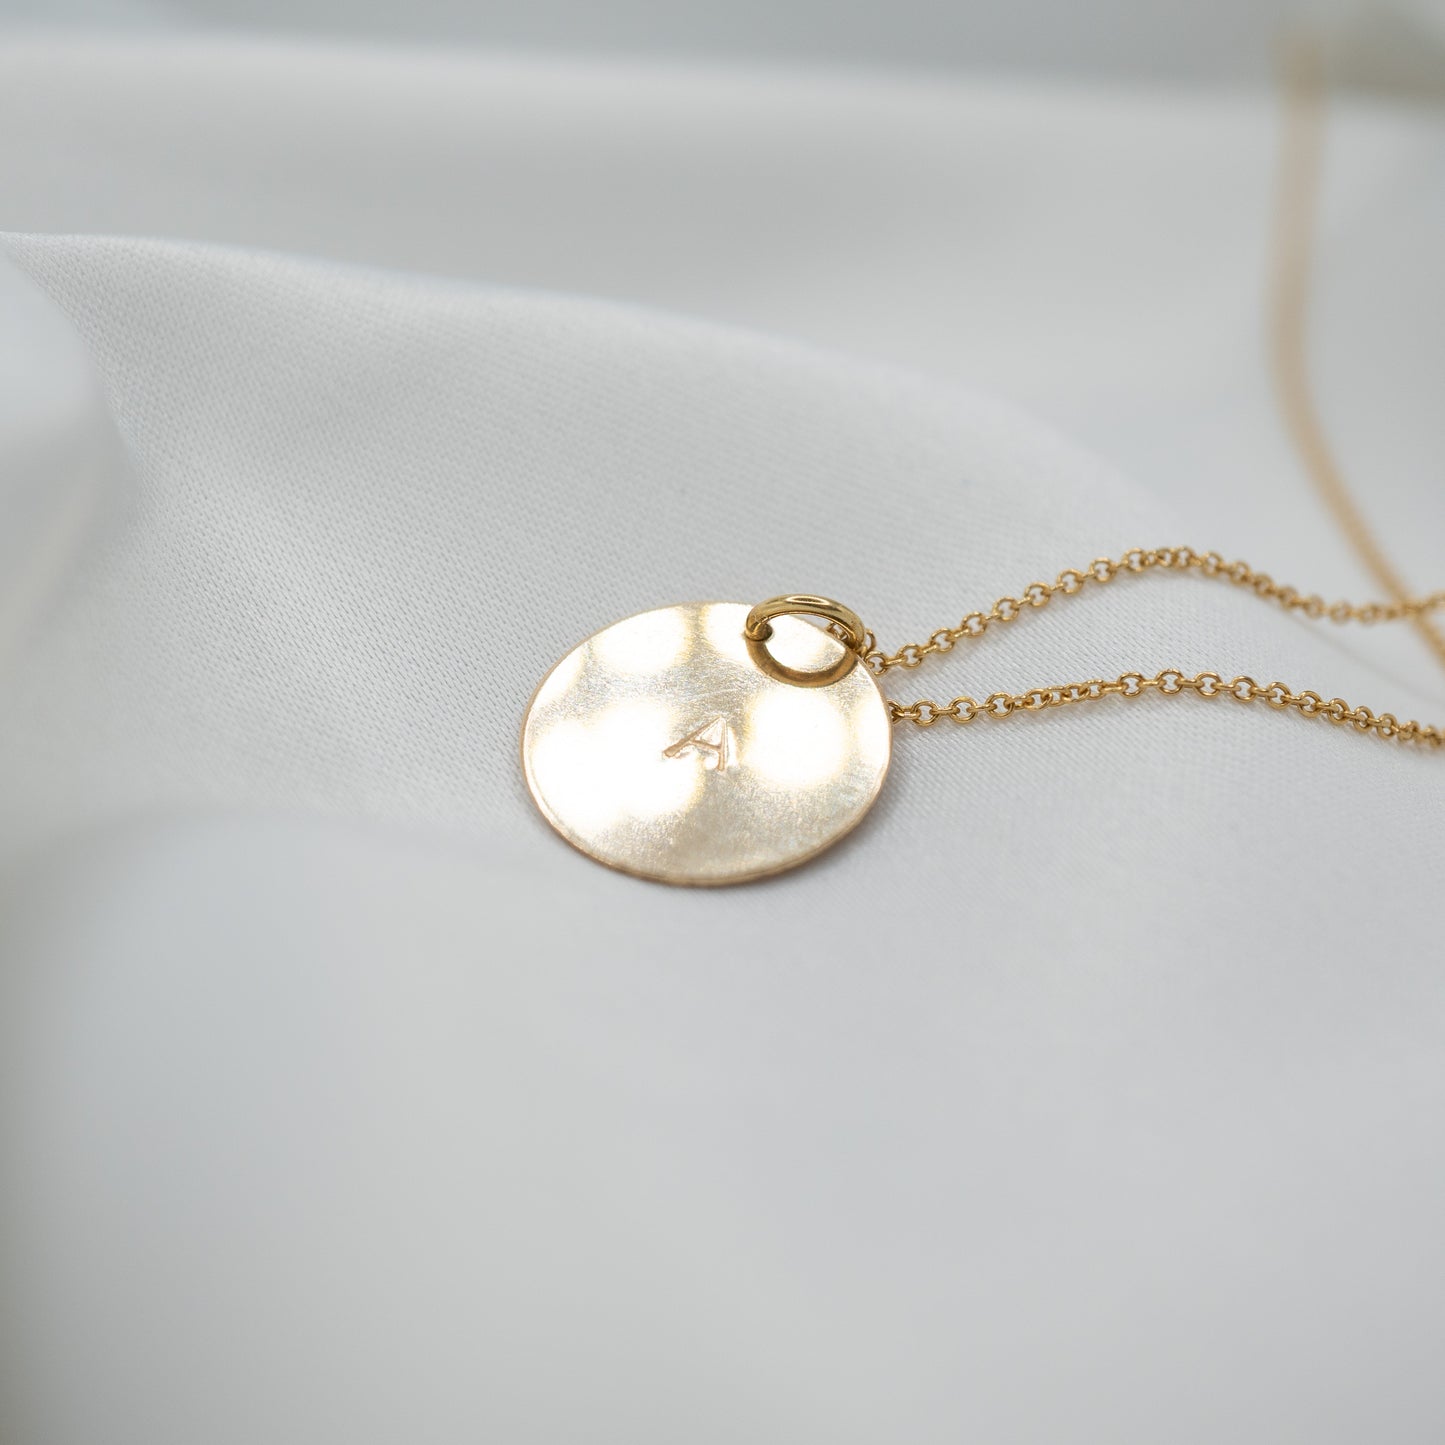 Gold Filled Hand Stamped Round Pendant and Necklace - Personalised Initial - shot on white - side view 